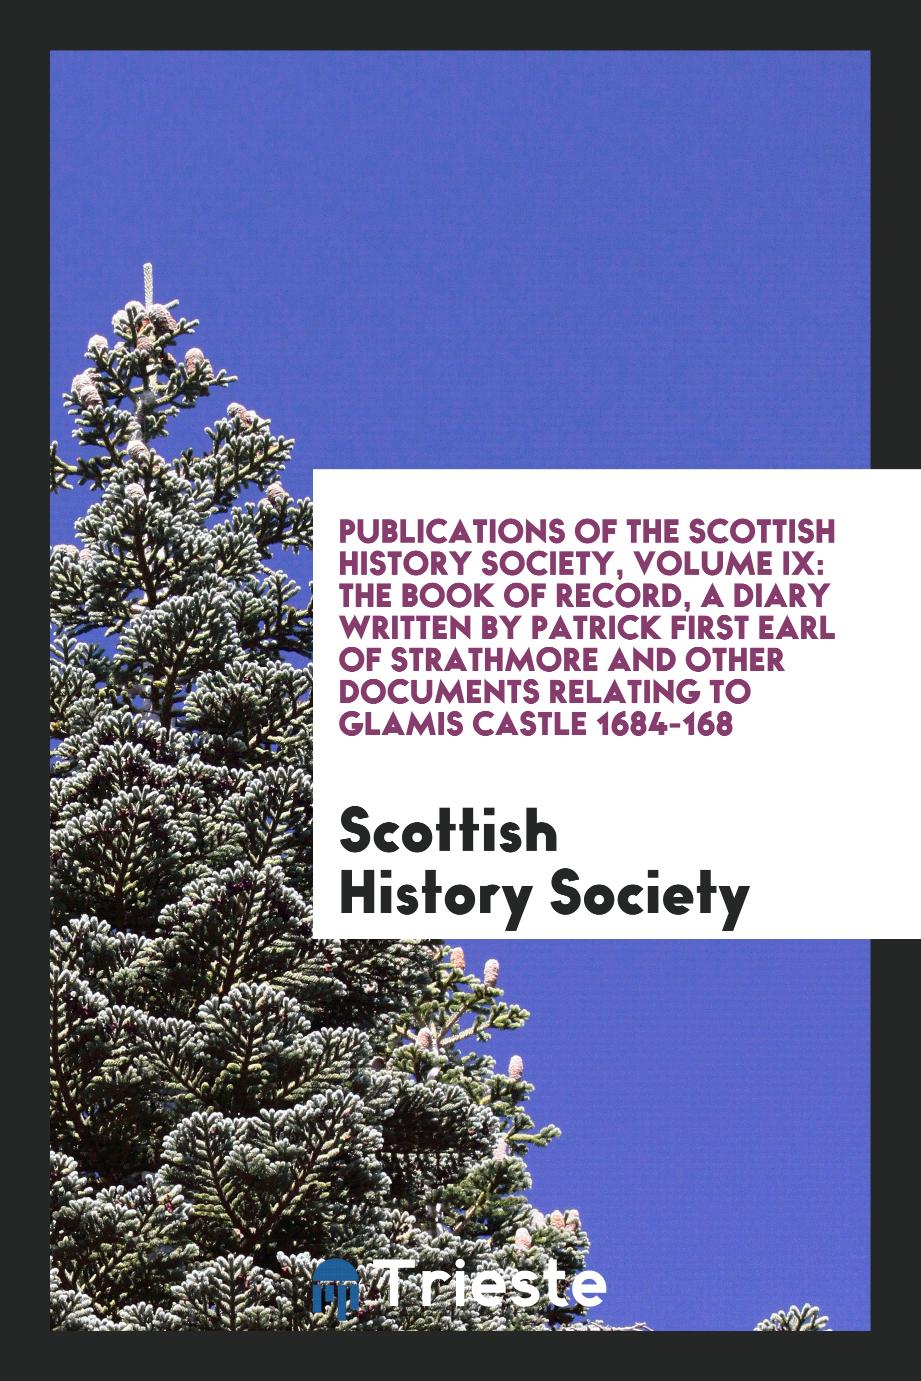 Publications of the Scottish History Society, Volume IX: The Book of Record, a Diary Written by Patrick First Earl of Strathmore and Other Documents Relating to Glamis Castle 1684-168